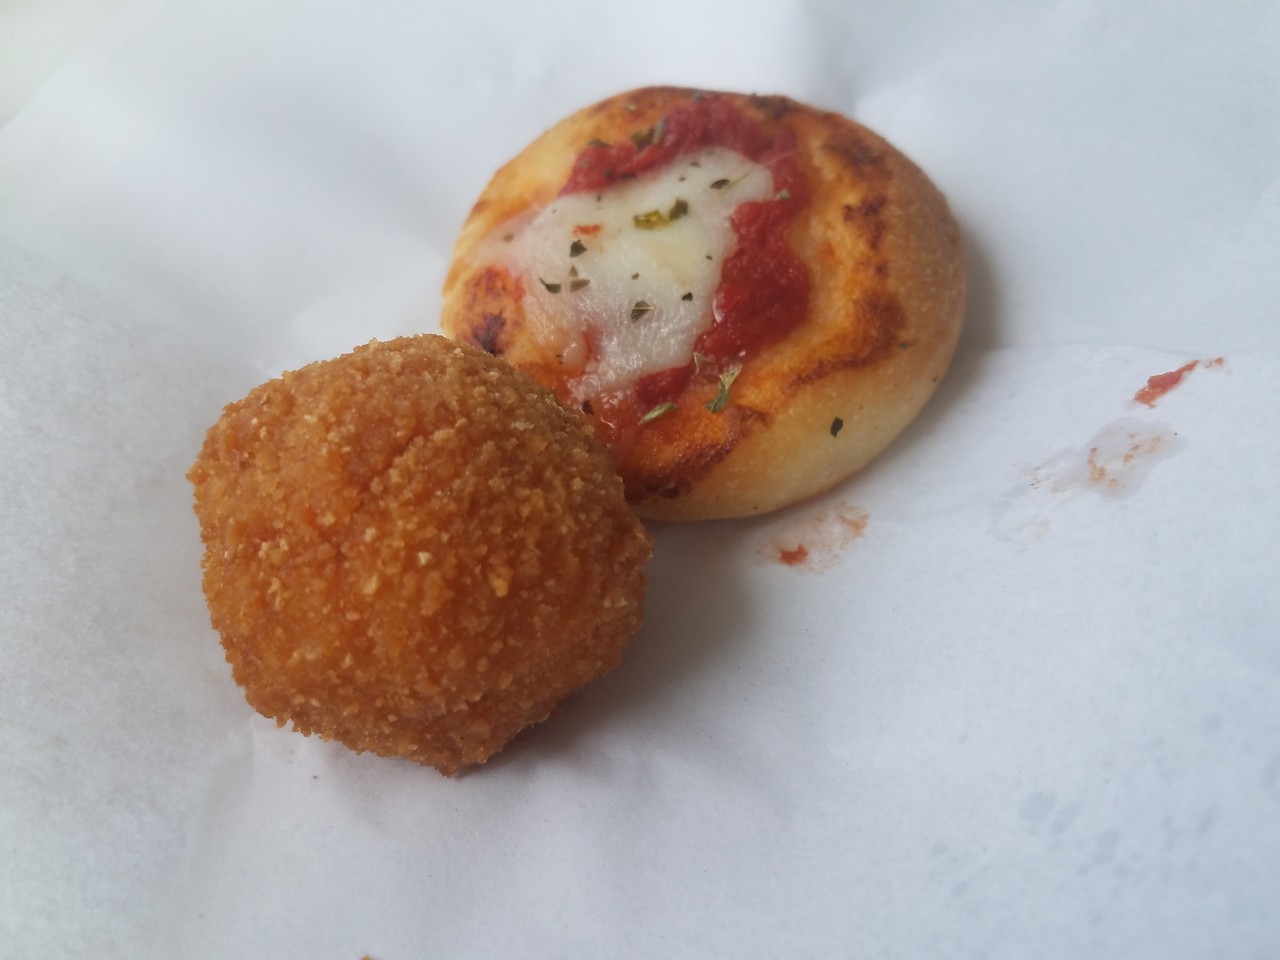 a small pizza and a round pizza ball